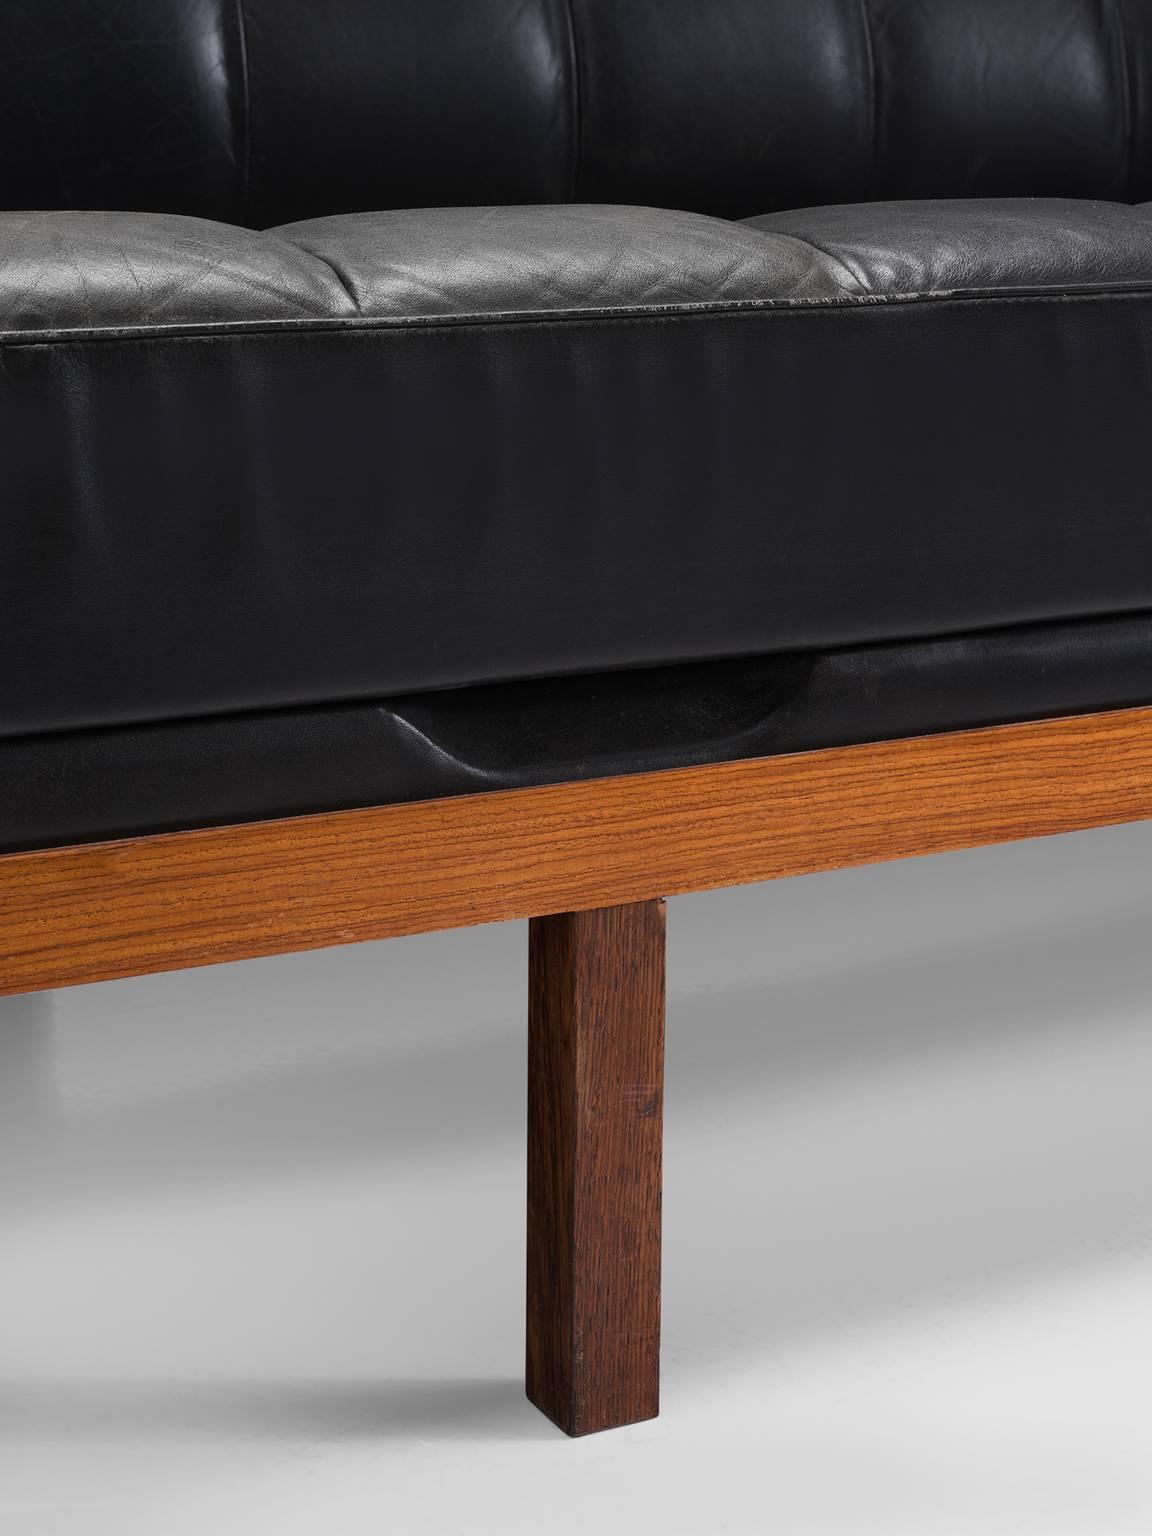 Mid-20th Century Johannes Spalt 'Constanze' Original Leather Rosewood Daybed for Wittmann